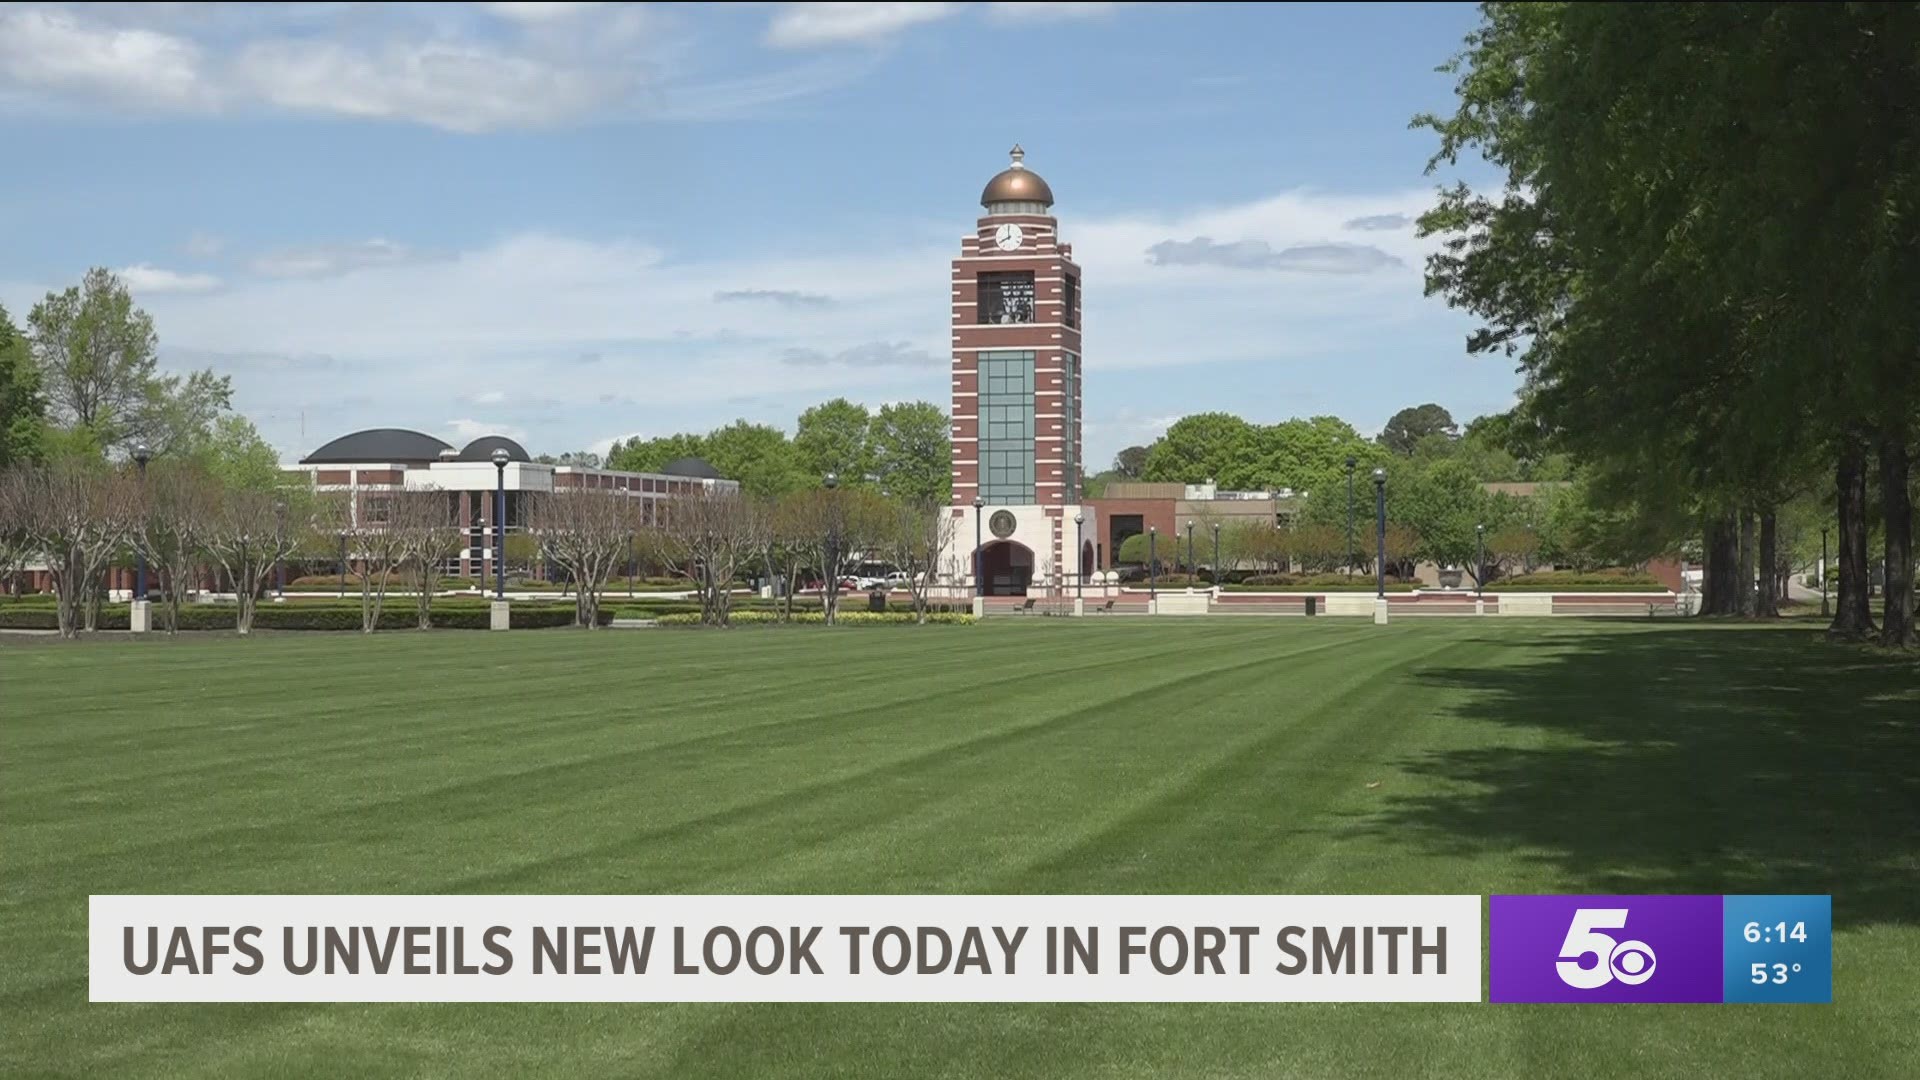 Following over a year of research and analysis, a new logo for the University of Arkansas - Fort Smith has been unveiled.